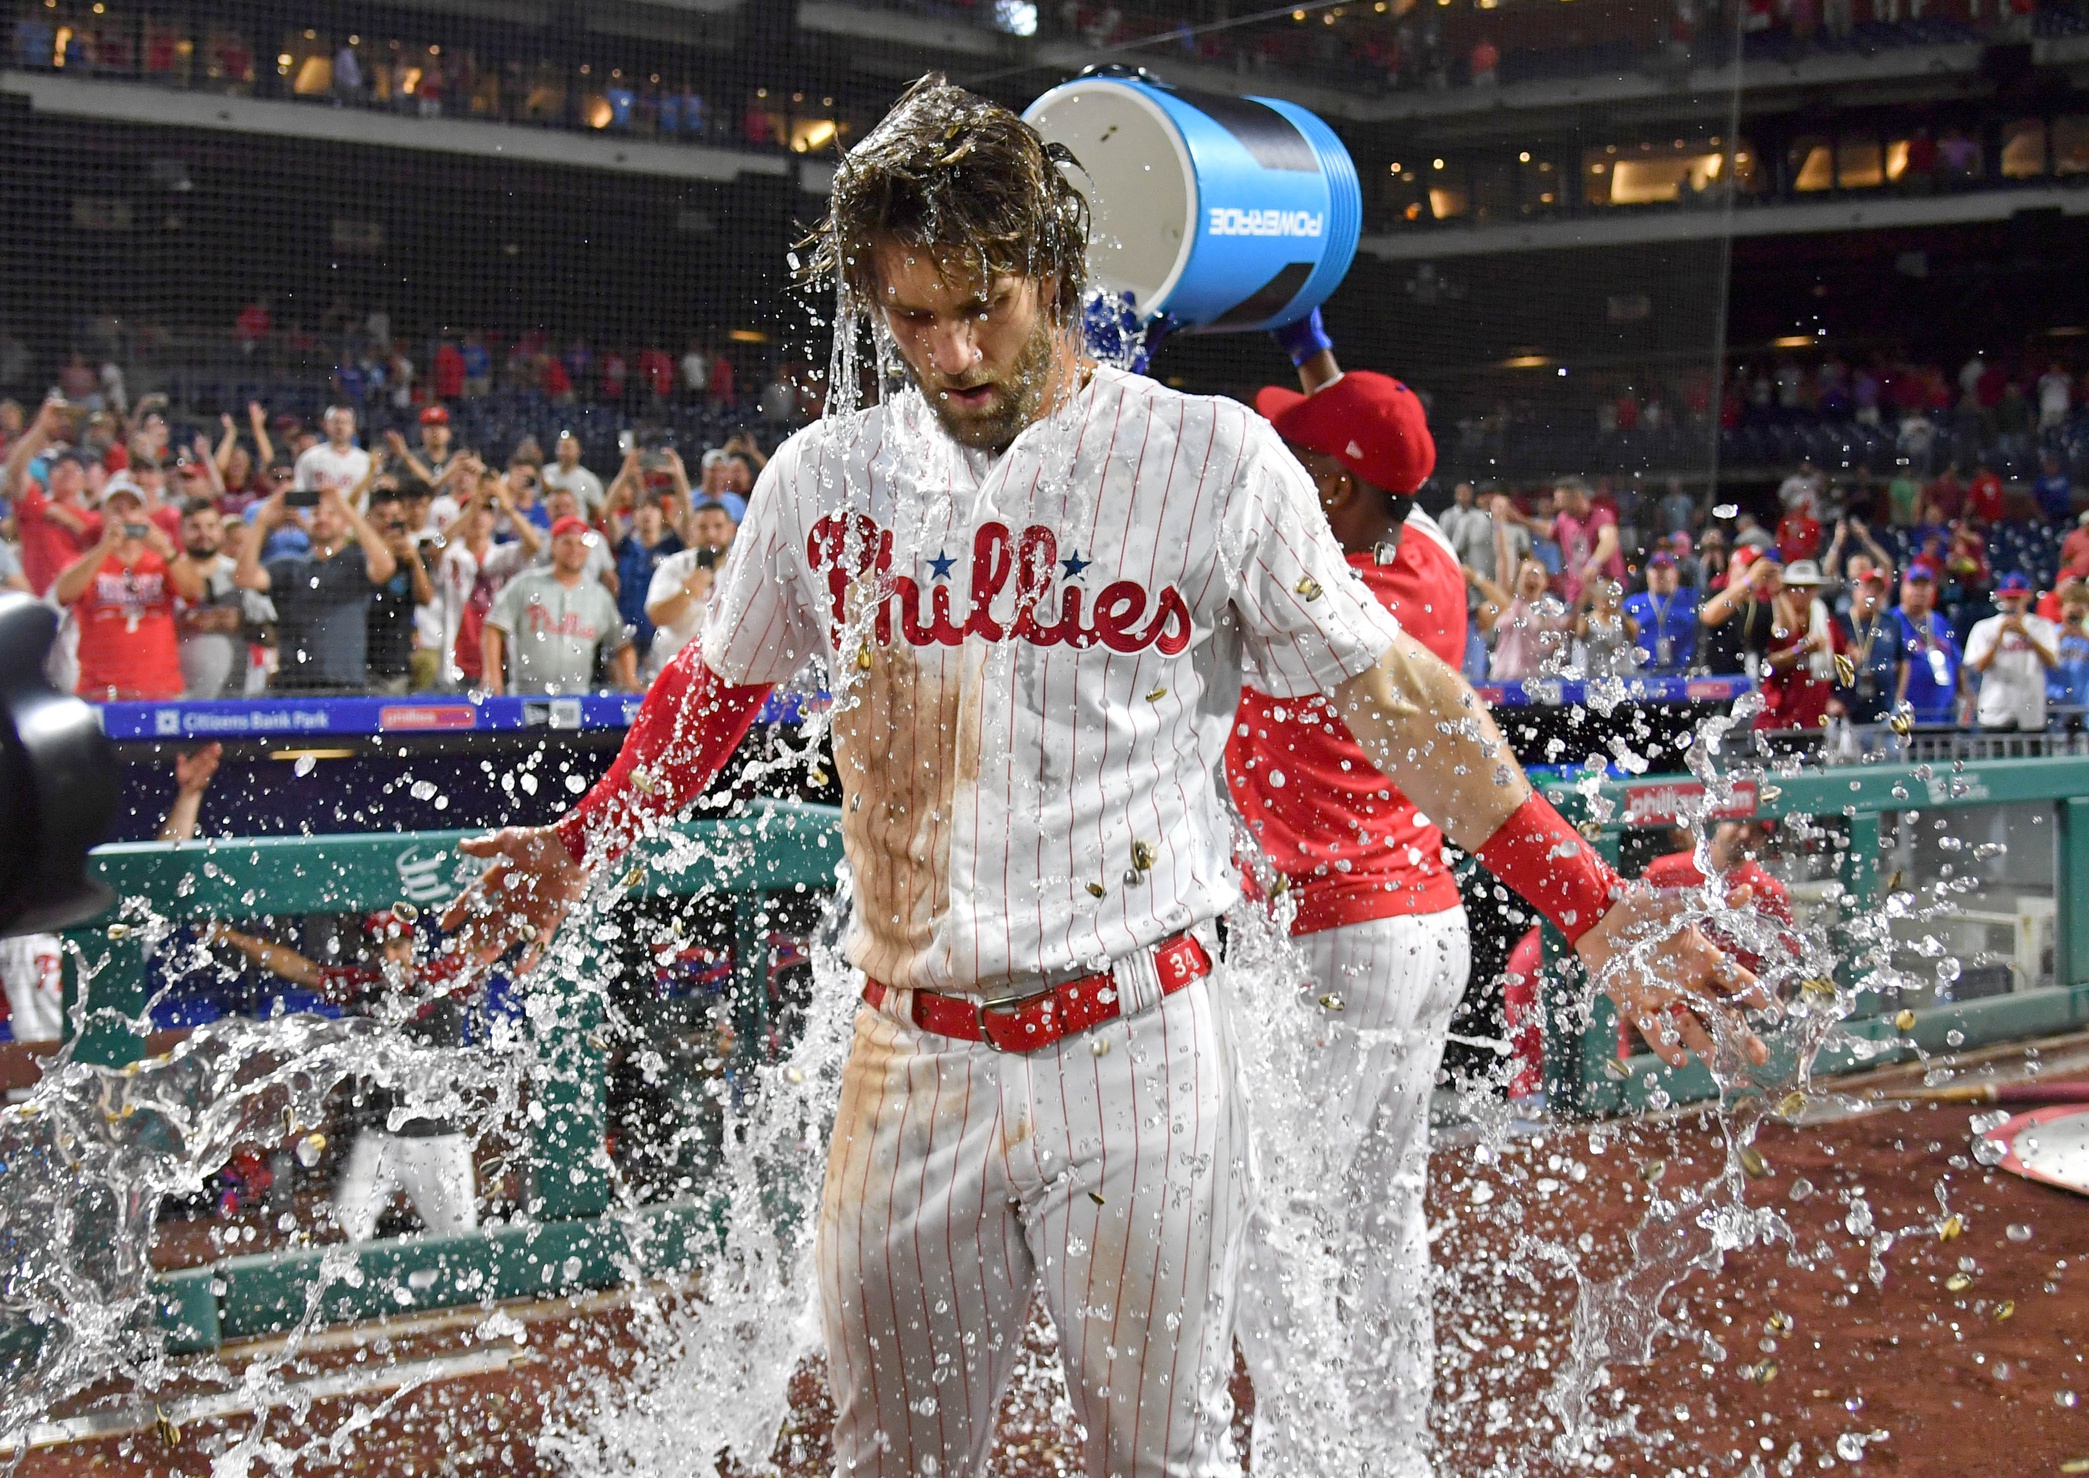 Here are the TV and Radio Calls of Bryce Harper's Walkoff Hit